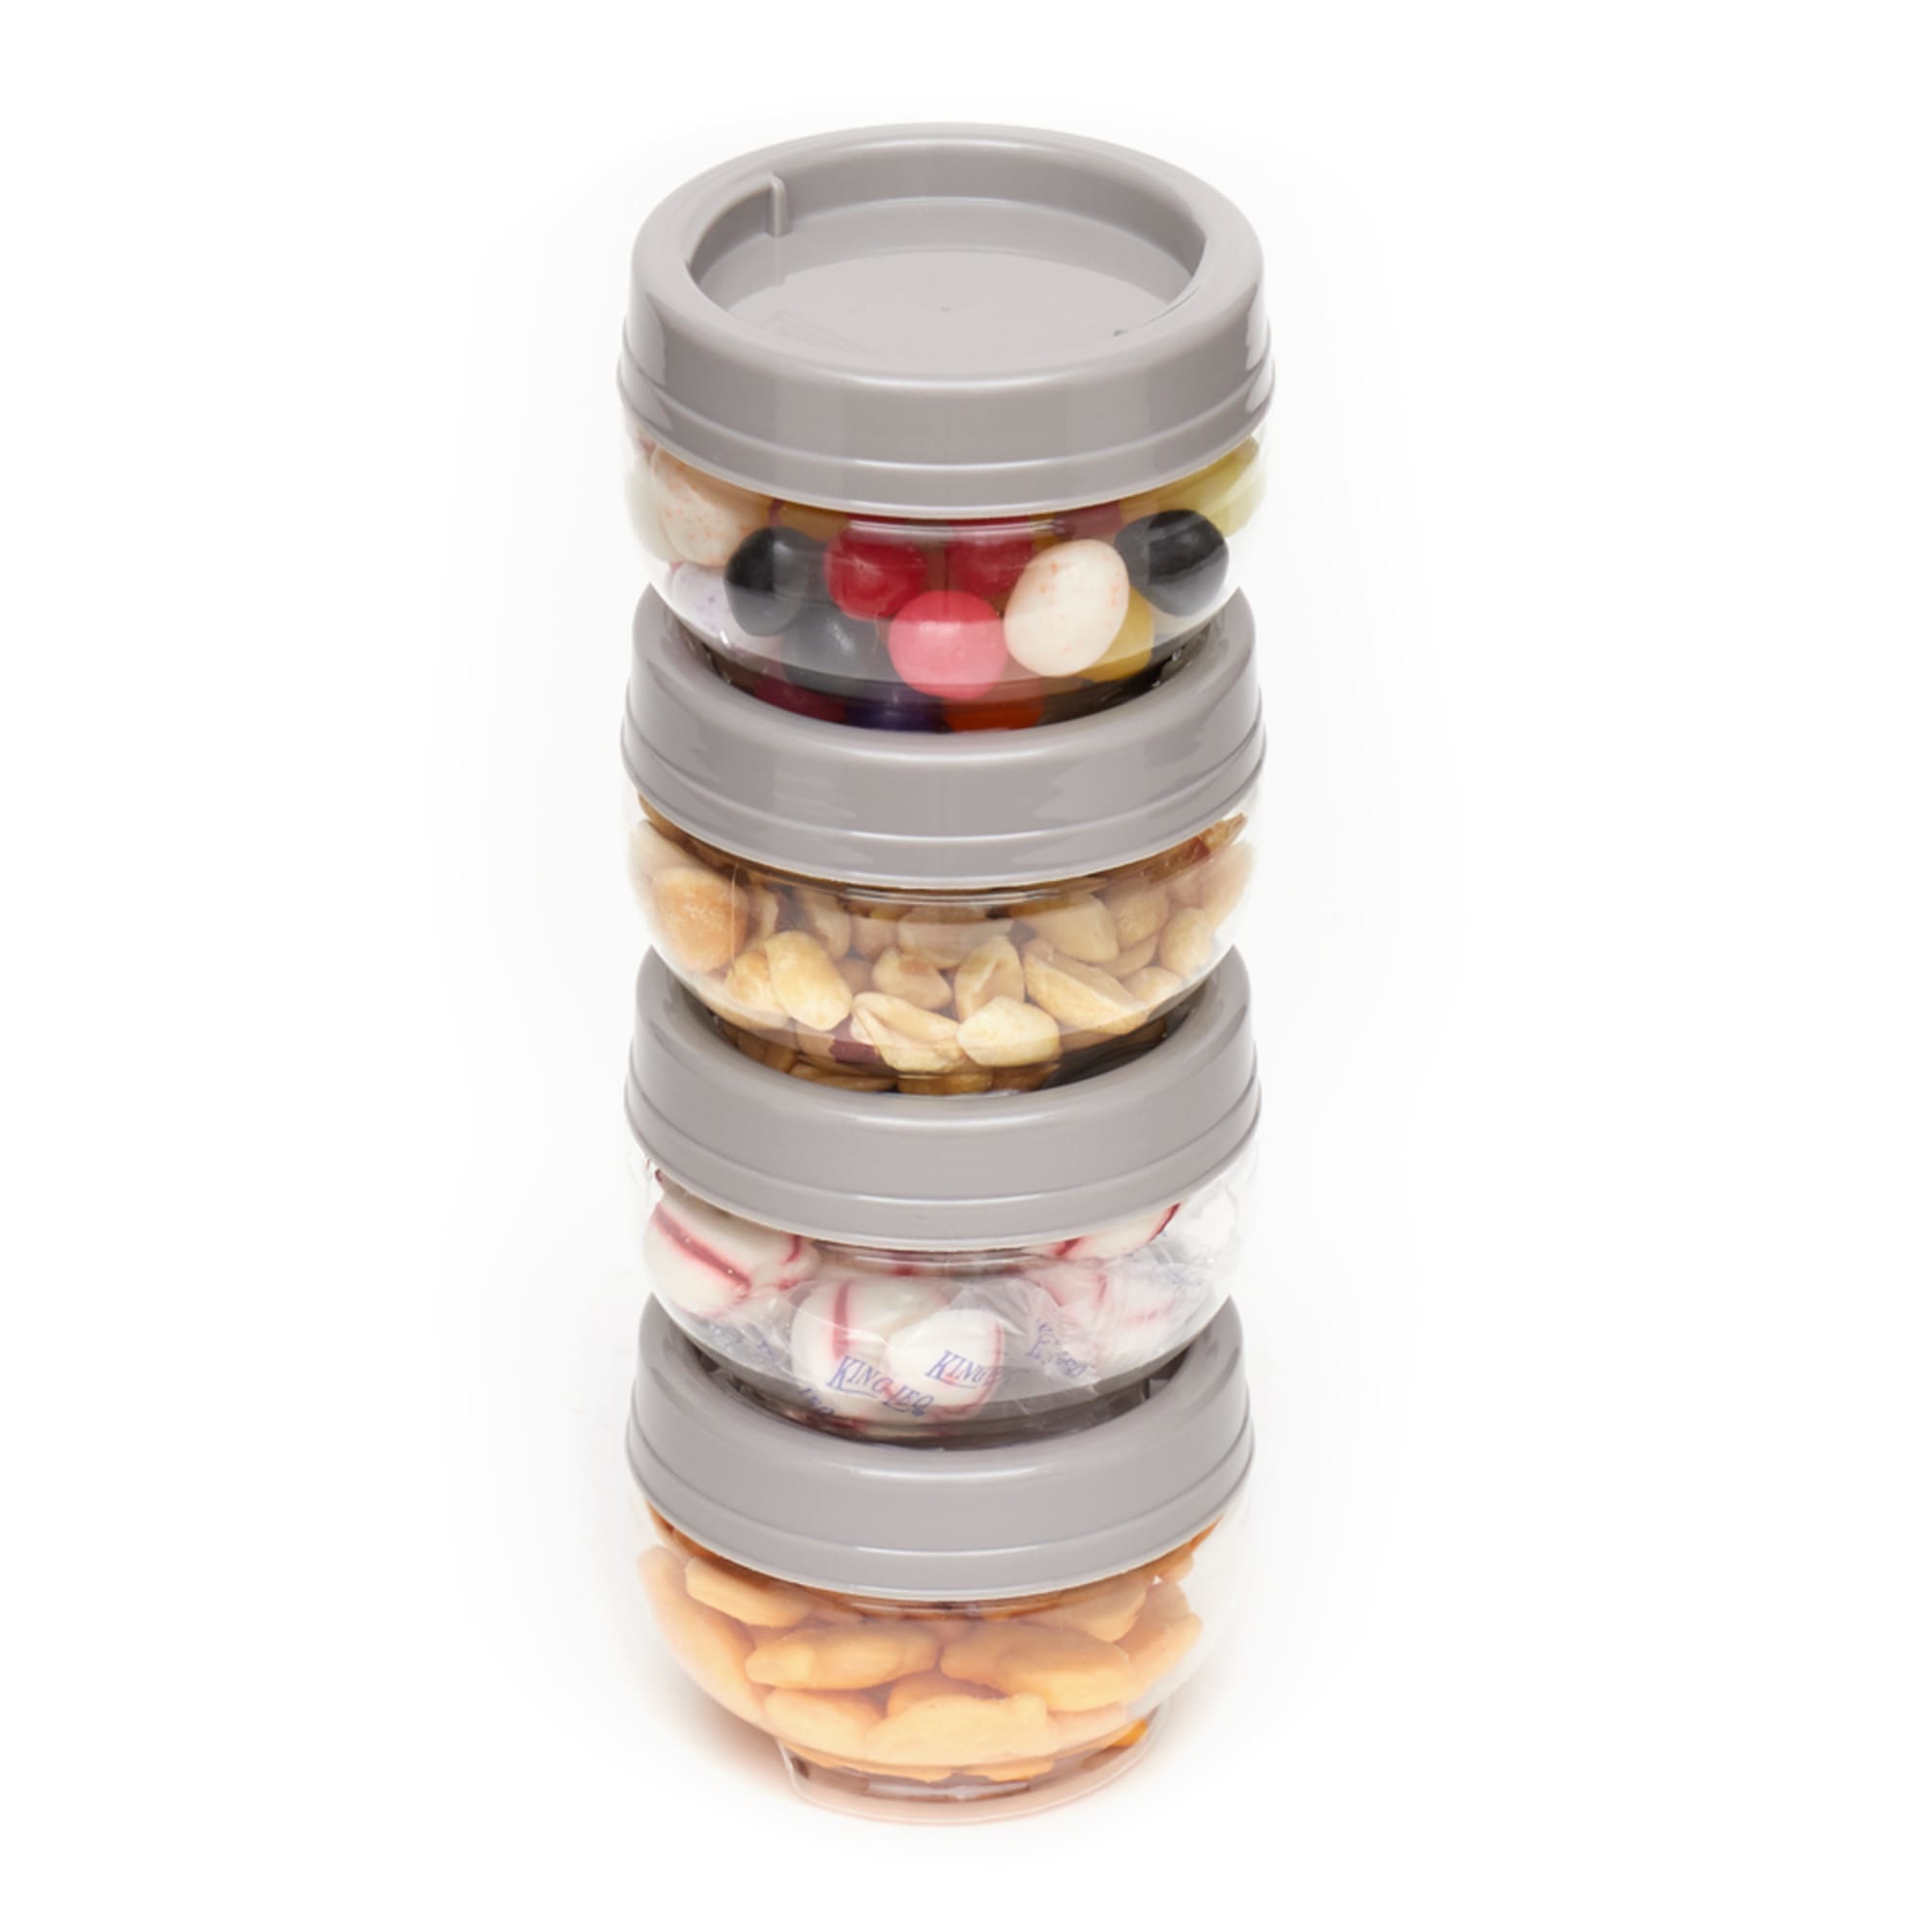 Home Basics 4 Piece 5.4 oz. Stackable Food Storage Containers, Clear/Grey $4.00 EACH, CASE PACK OF 9